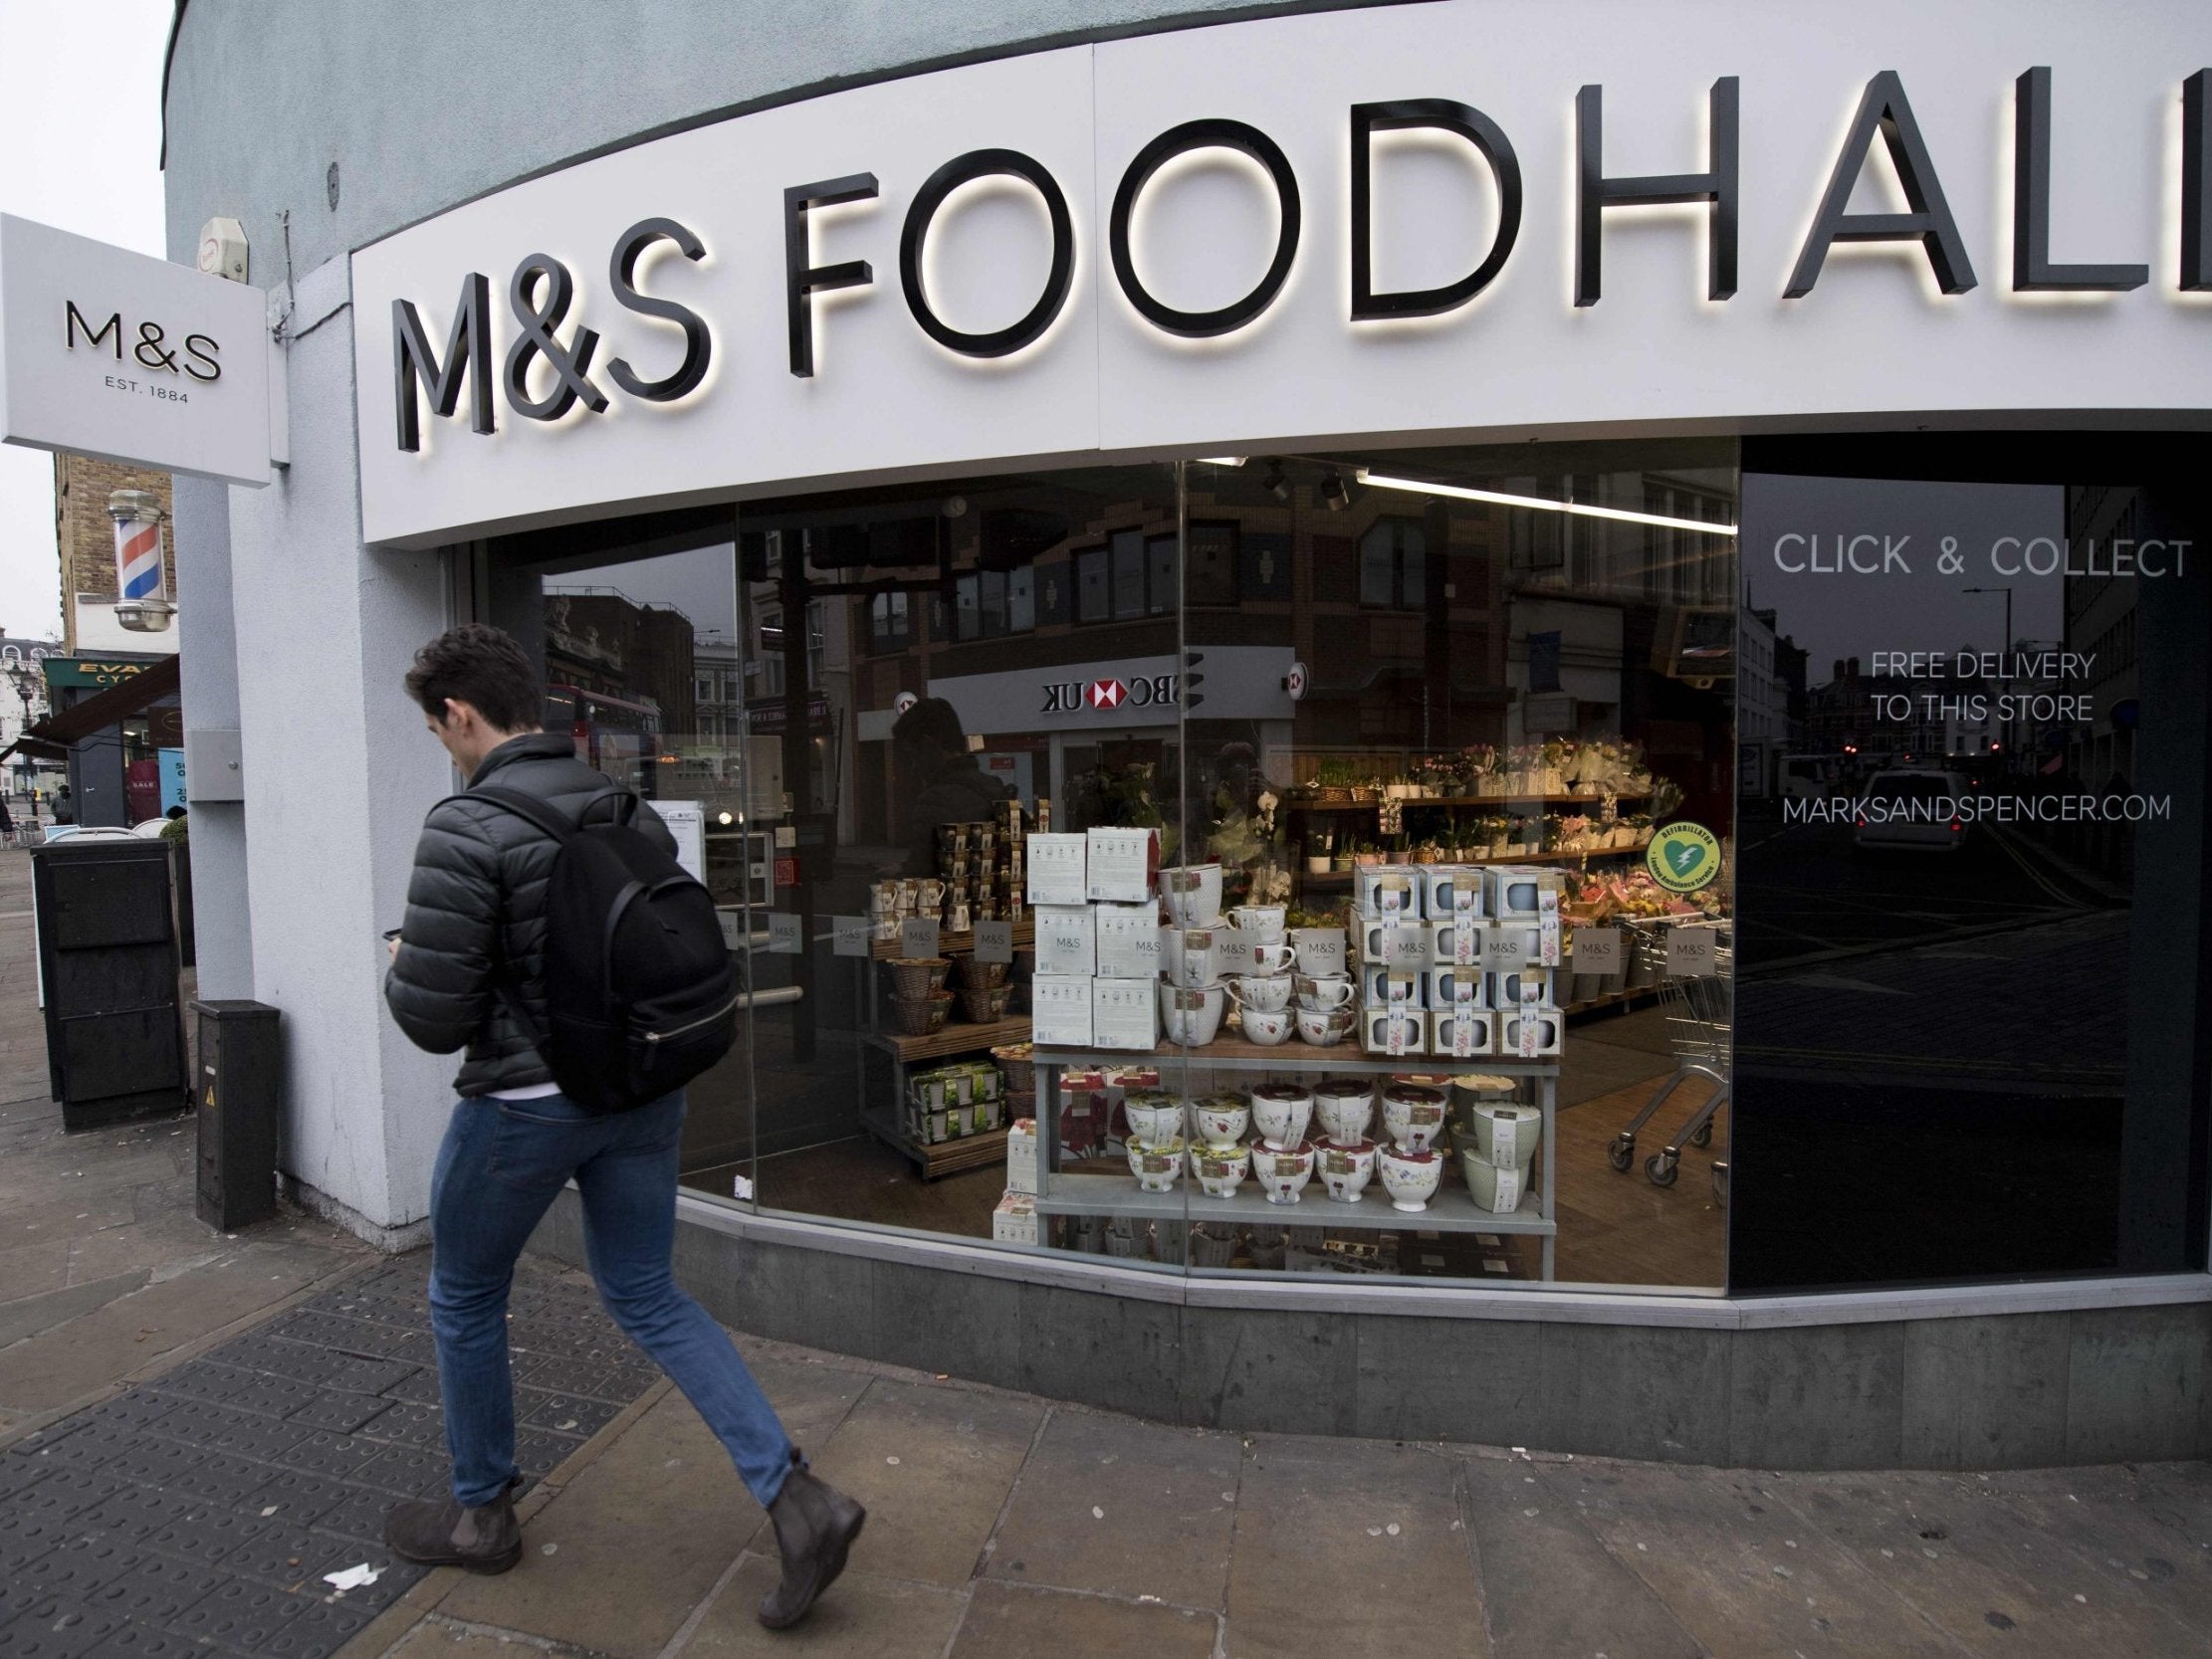 M&S is set to open more food halls like this one